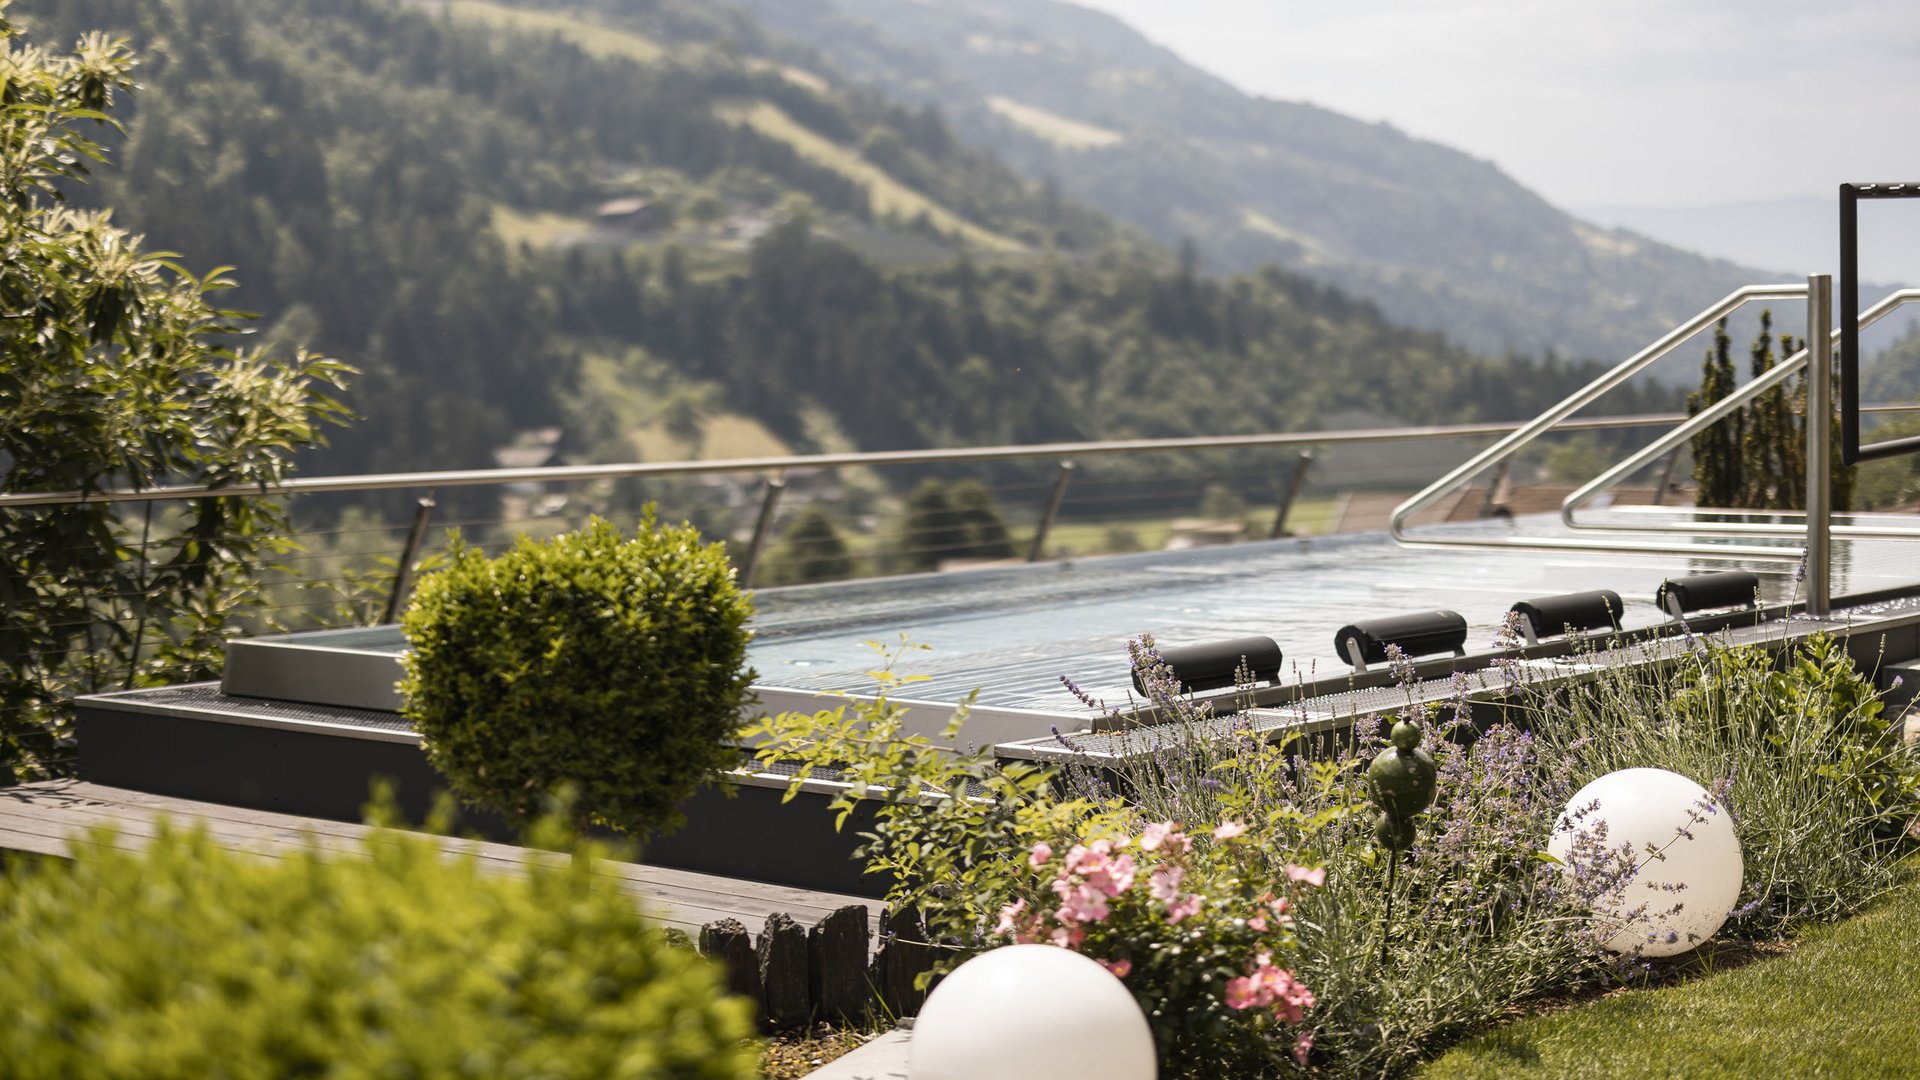 Alpenschlössel: your hotel with infinity pool in South Tyrol